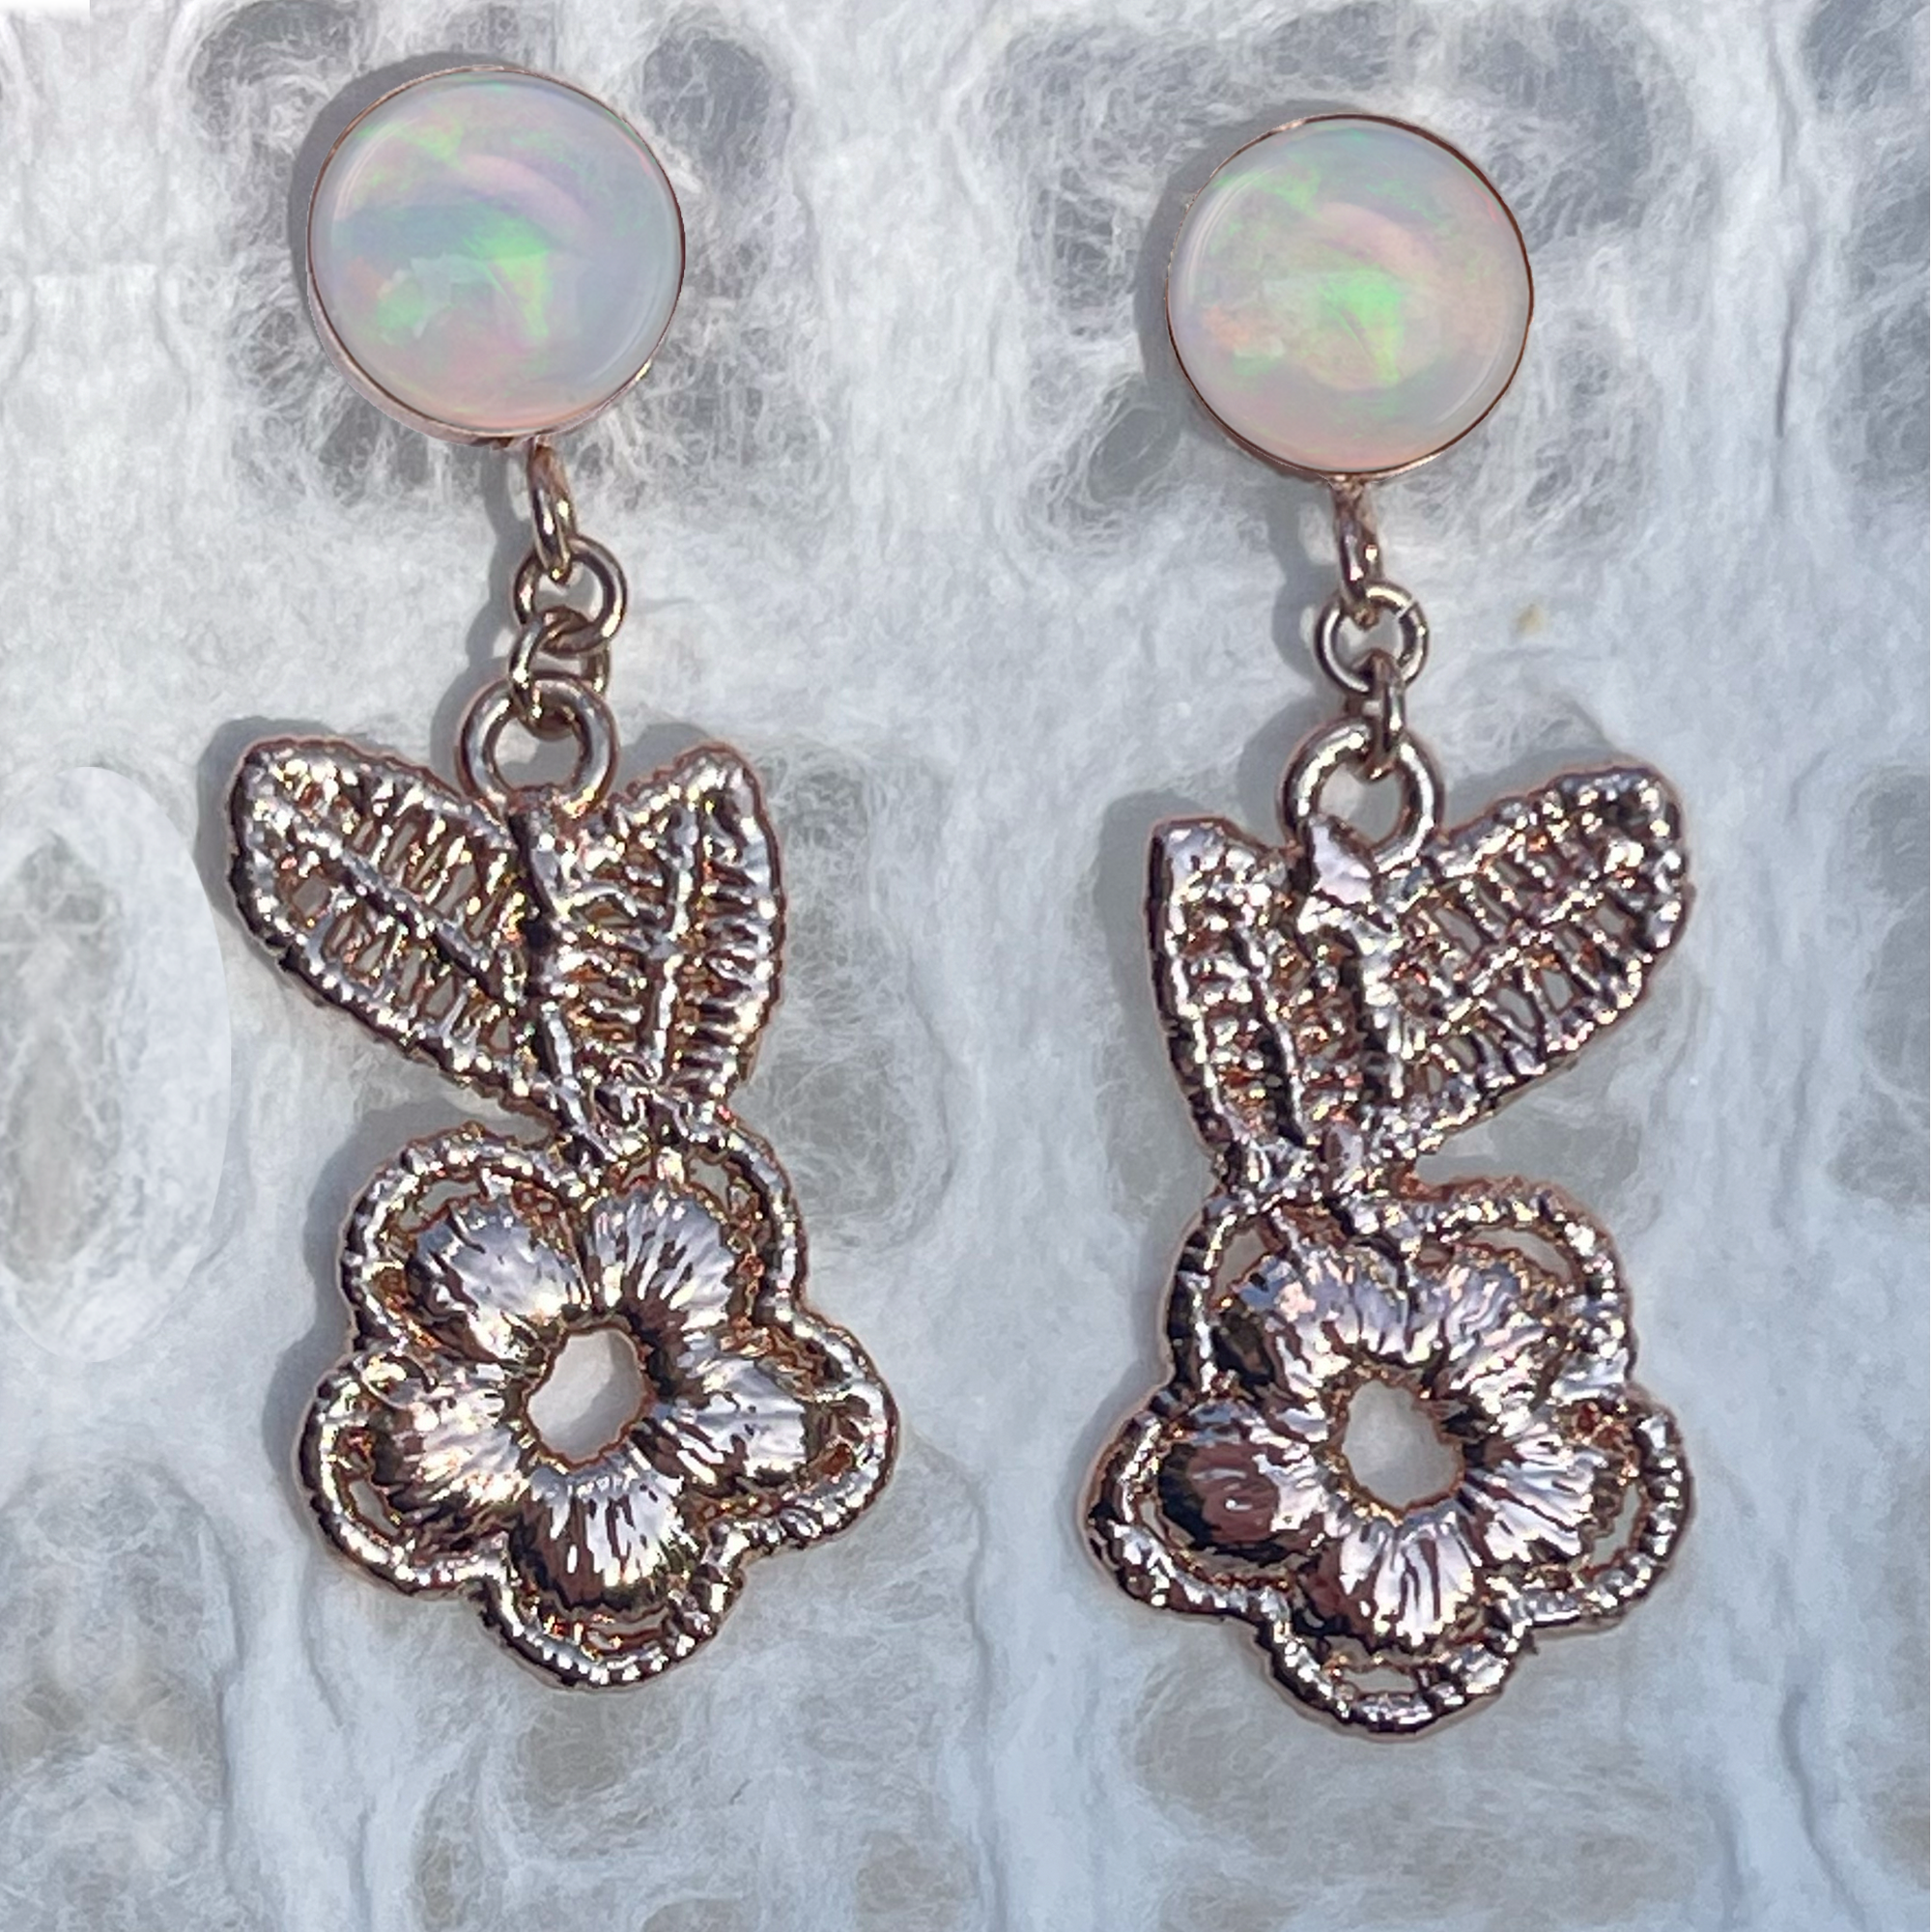 Flower lace earrings in rose gold with opals.